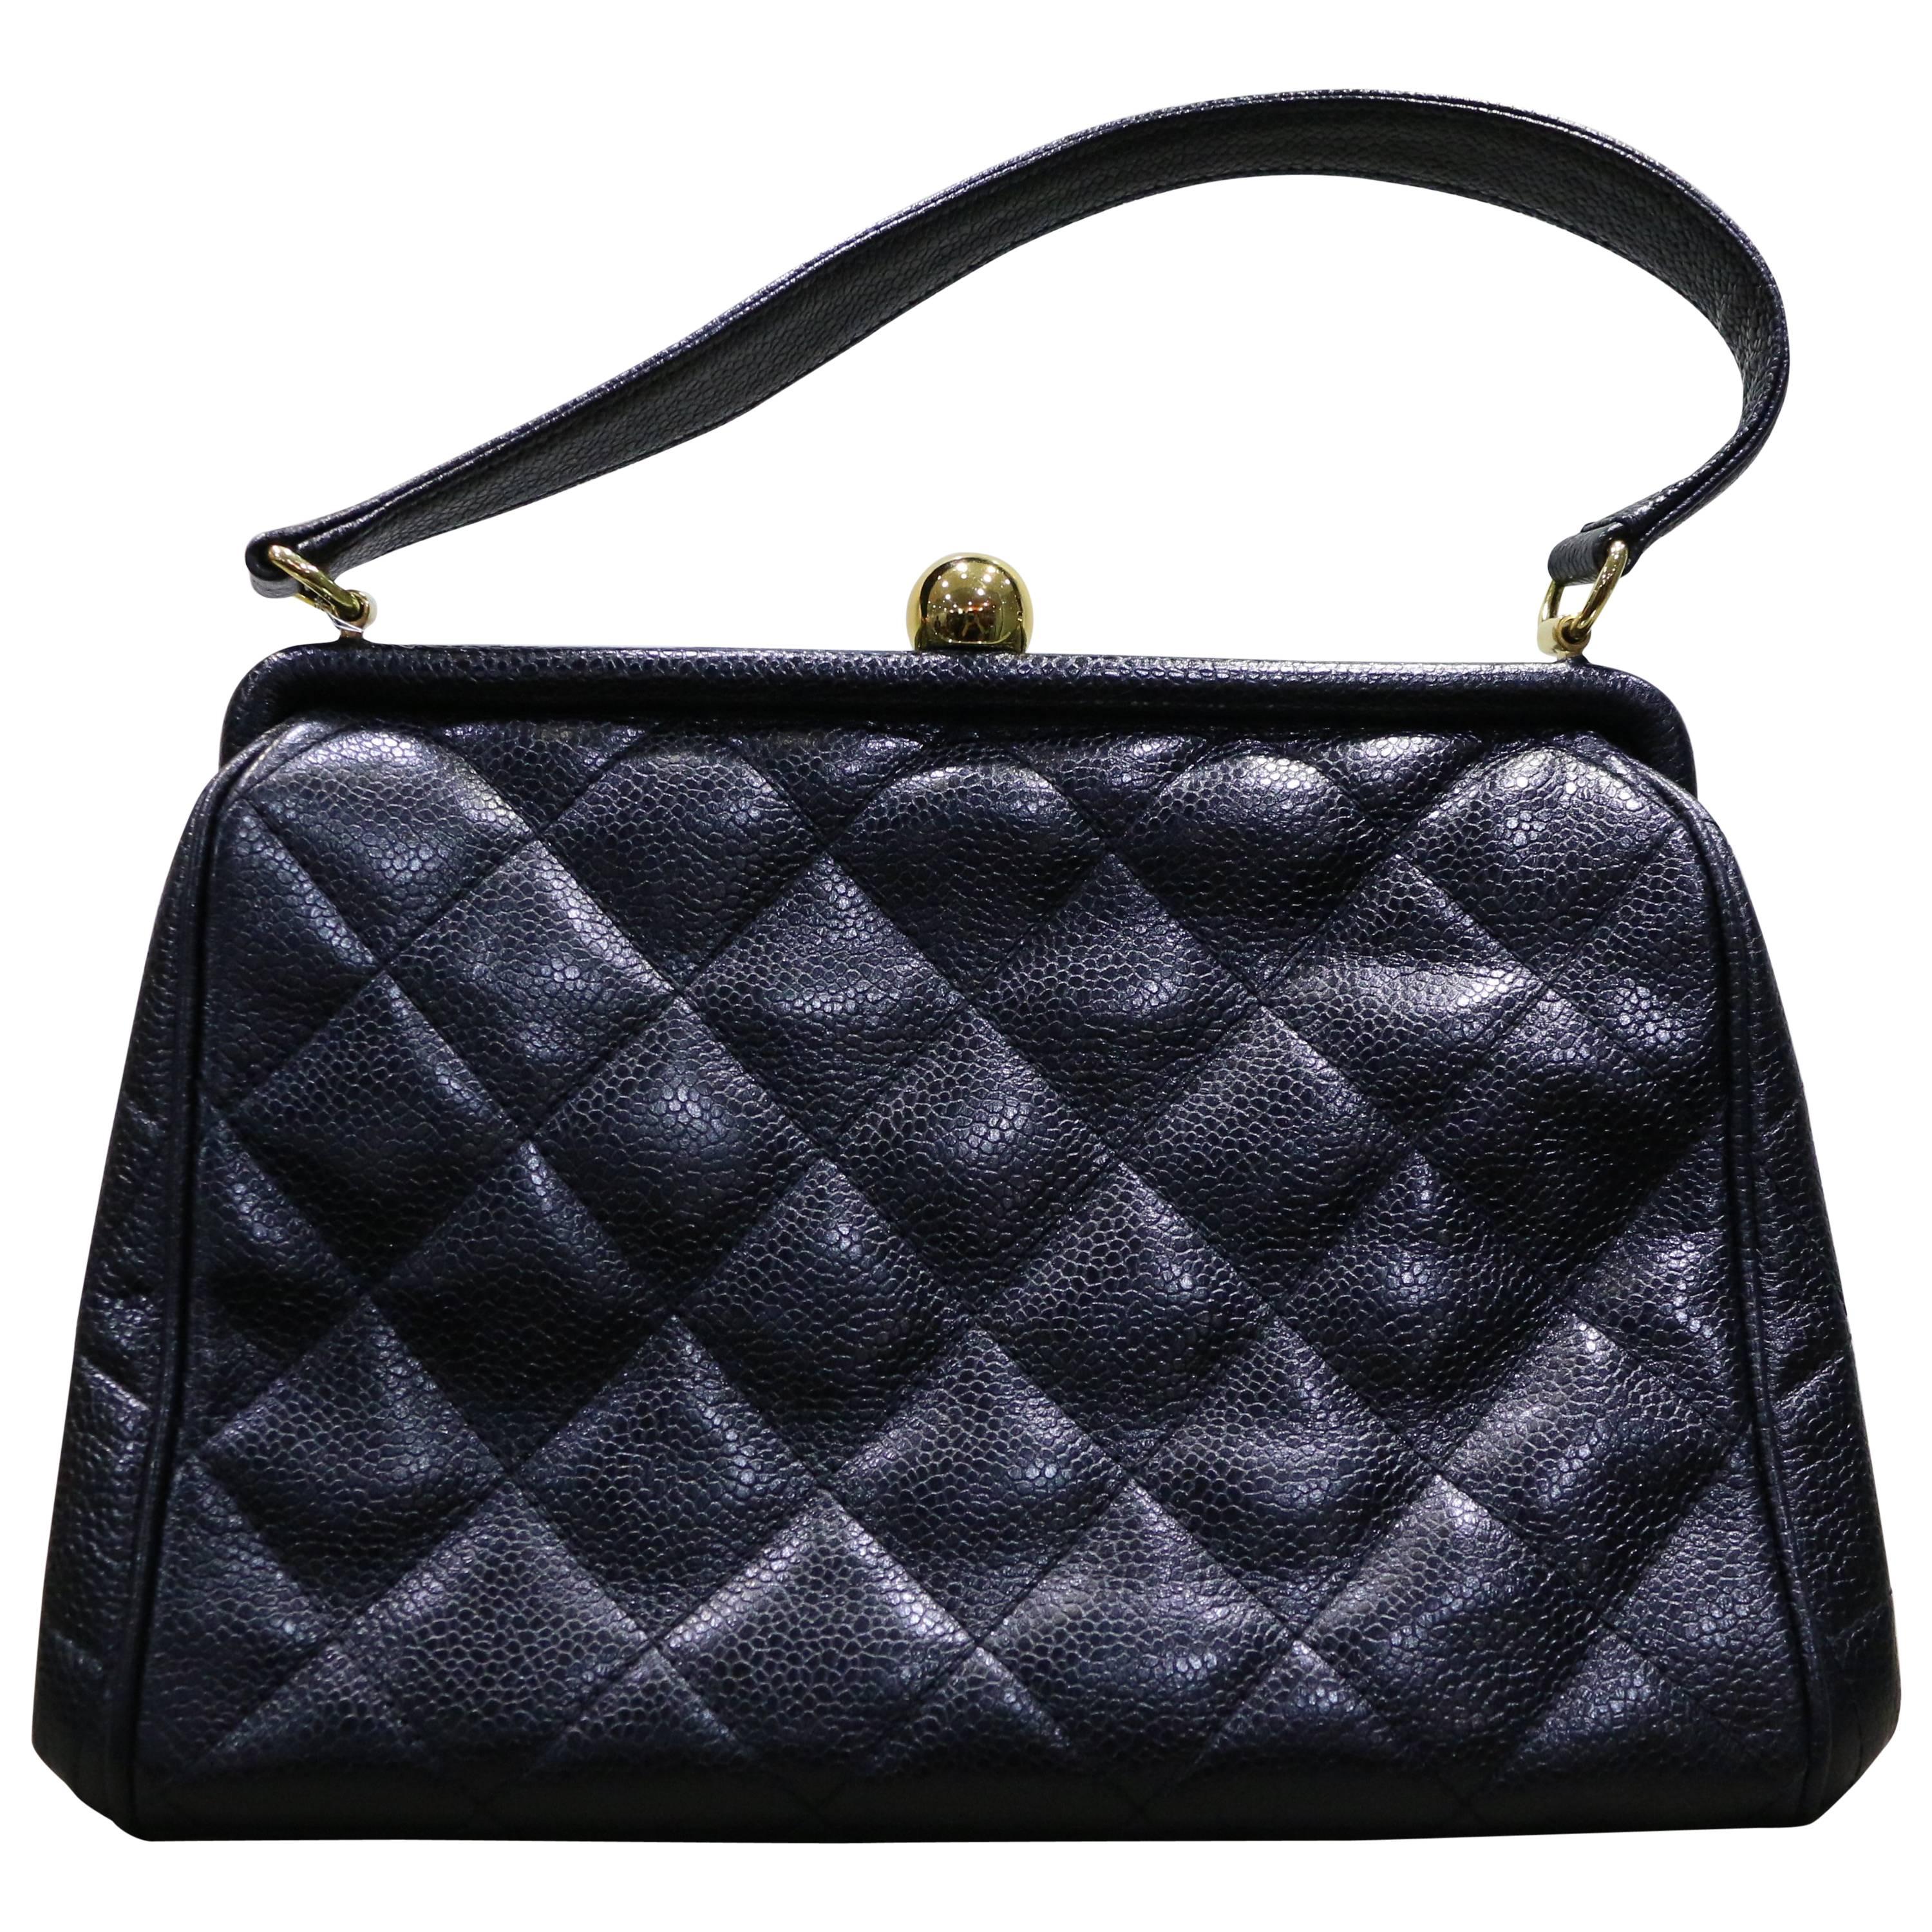 Chanel Black Quilted Leather Handbag